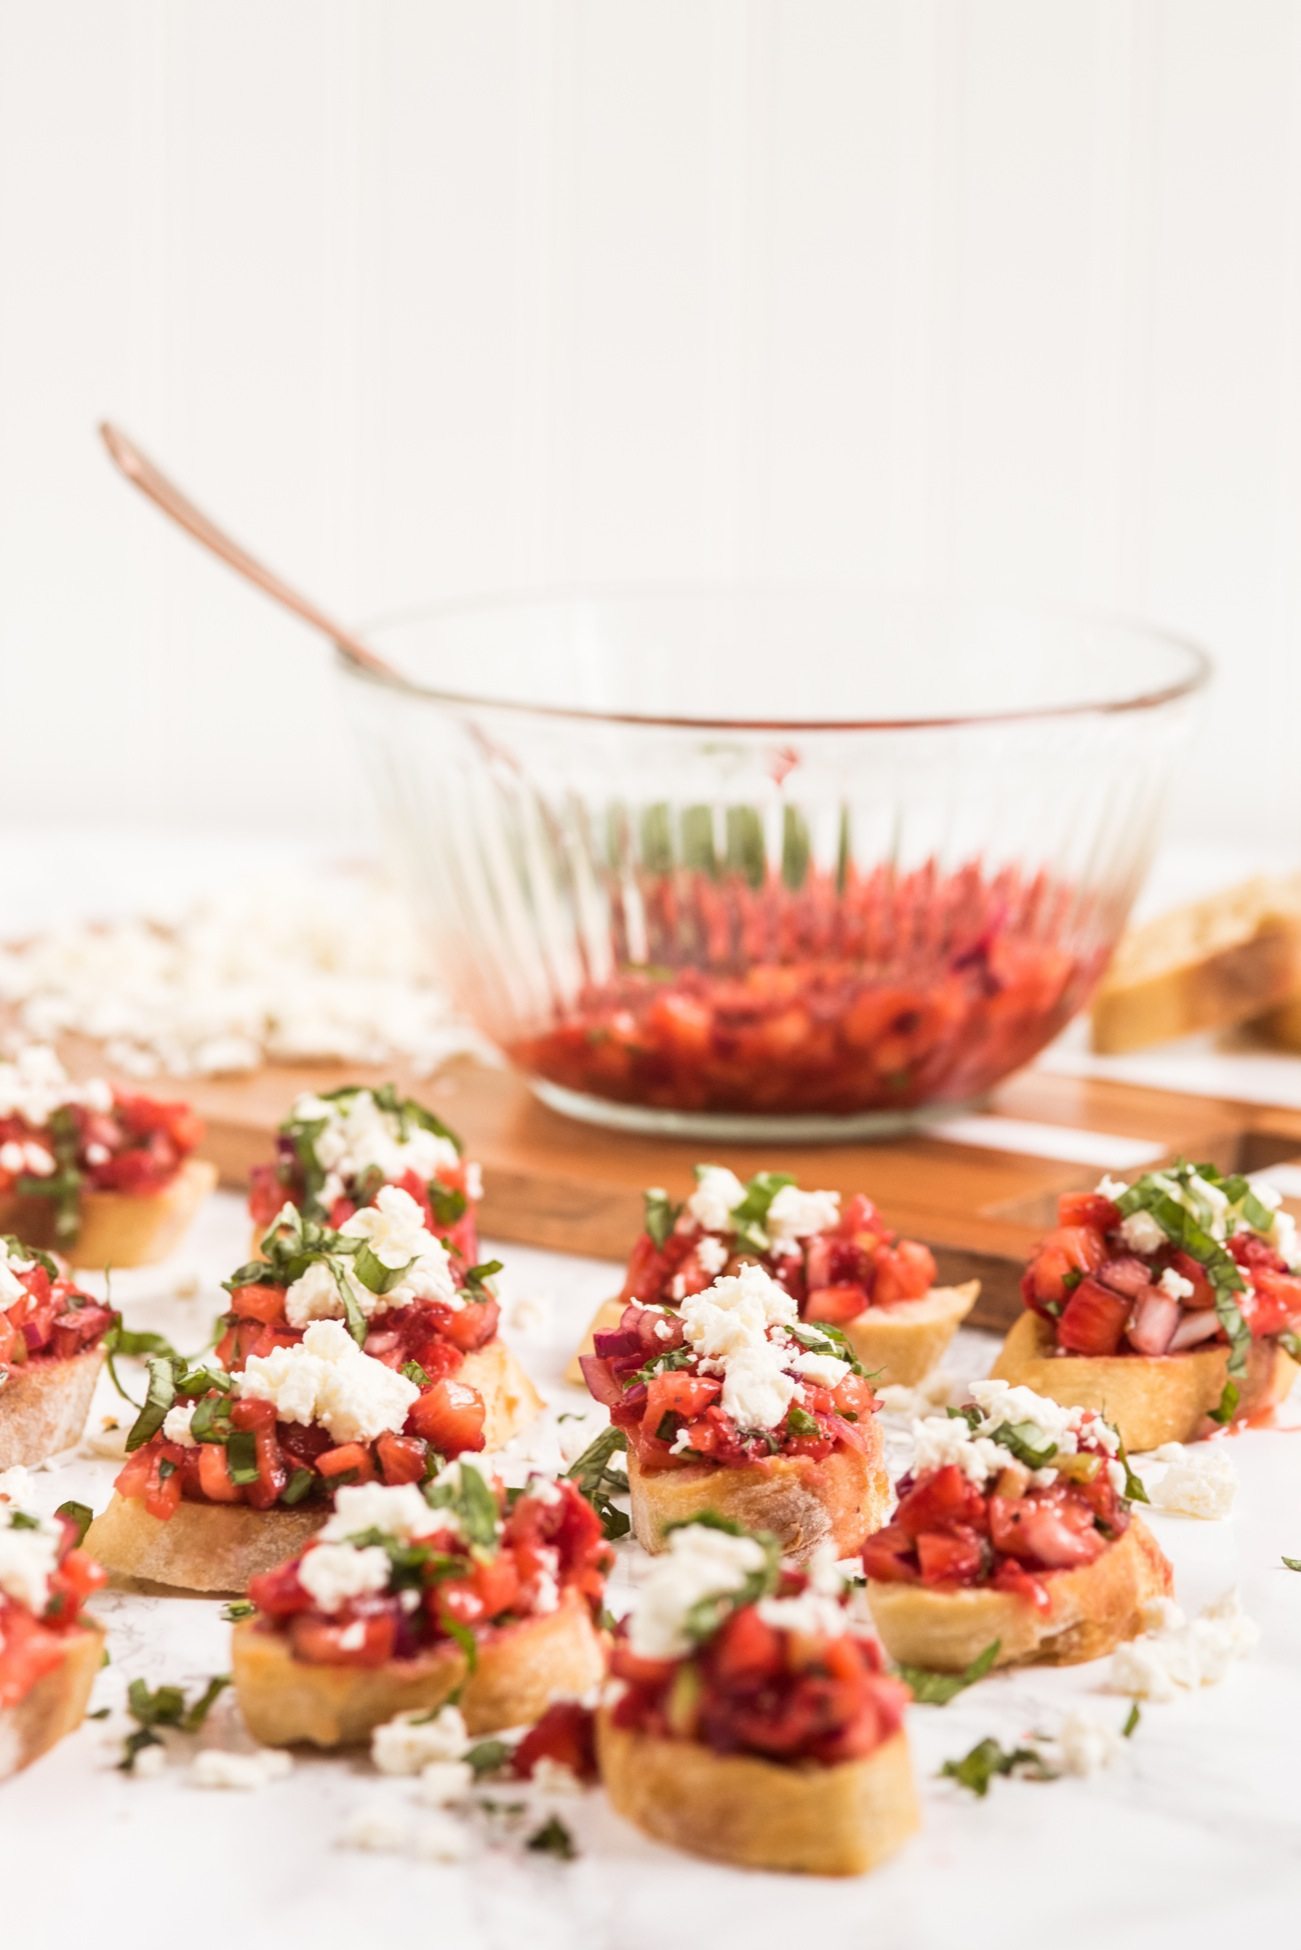 Strawberry Feta Bruschetta Recipe | Entertaining ideas, party appetizers, cocktail recipes, party ideas and more from @cydconverse